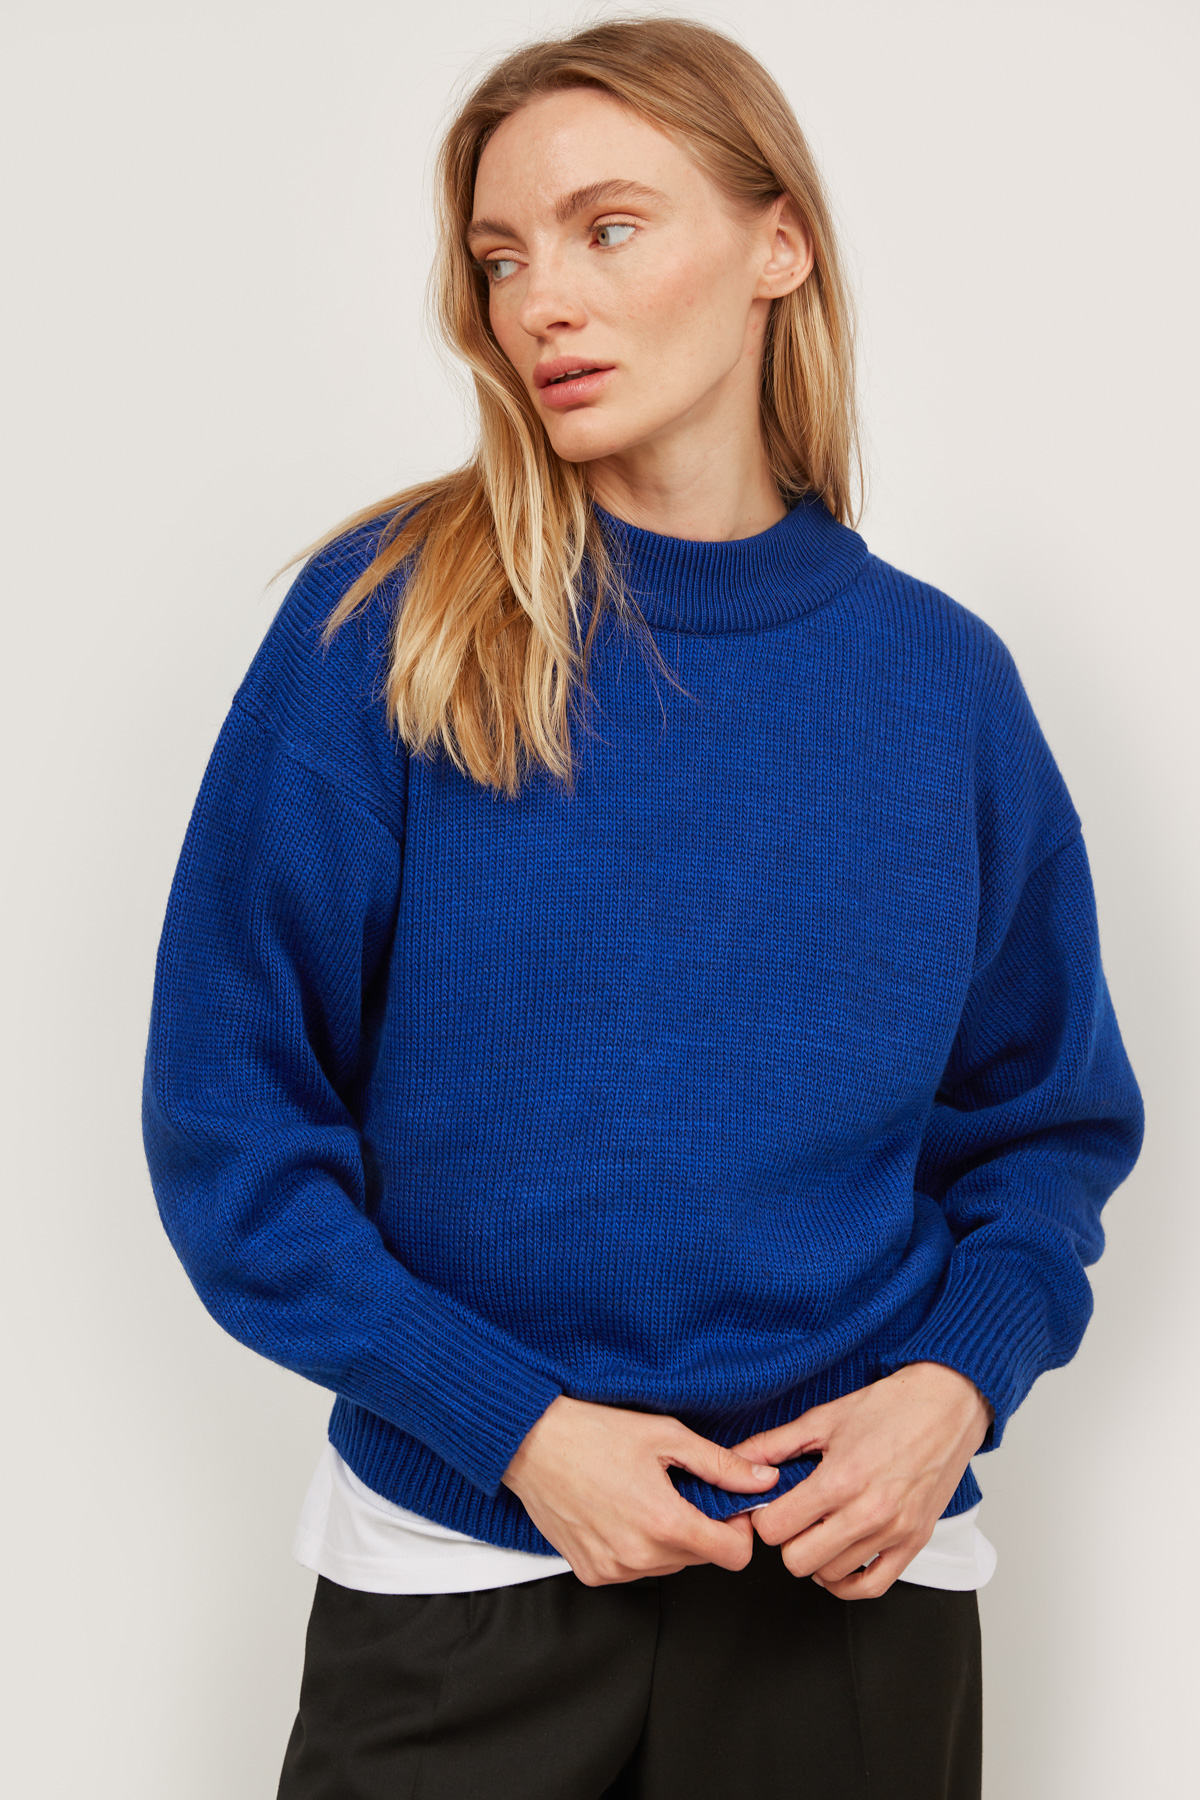 Electric blue knitted sweater, photo 2